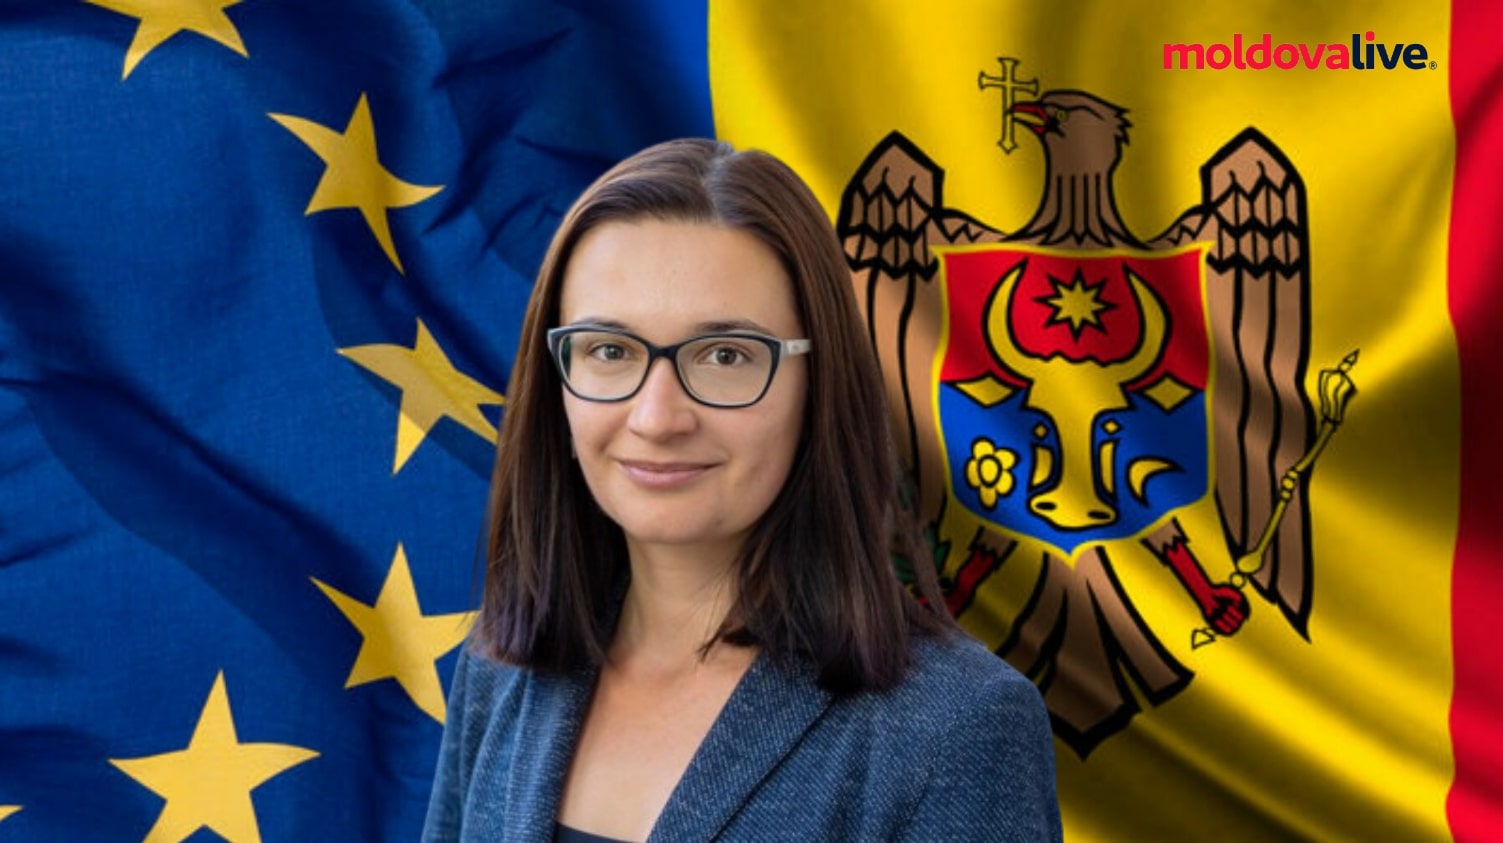 (VIDEO) Gherasimov on the 20th anniversary of the EU’s greatest enlargement: the next anniversary with Moldova as a member state